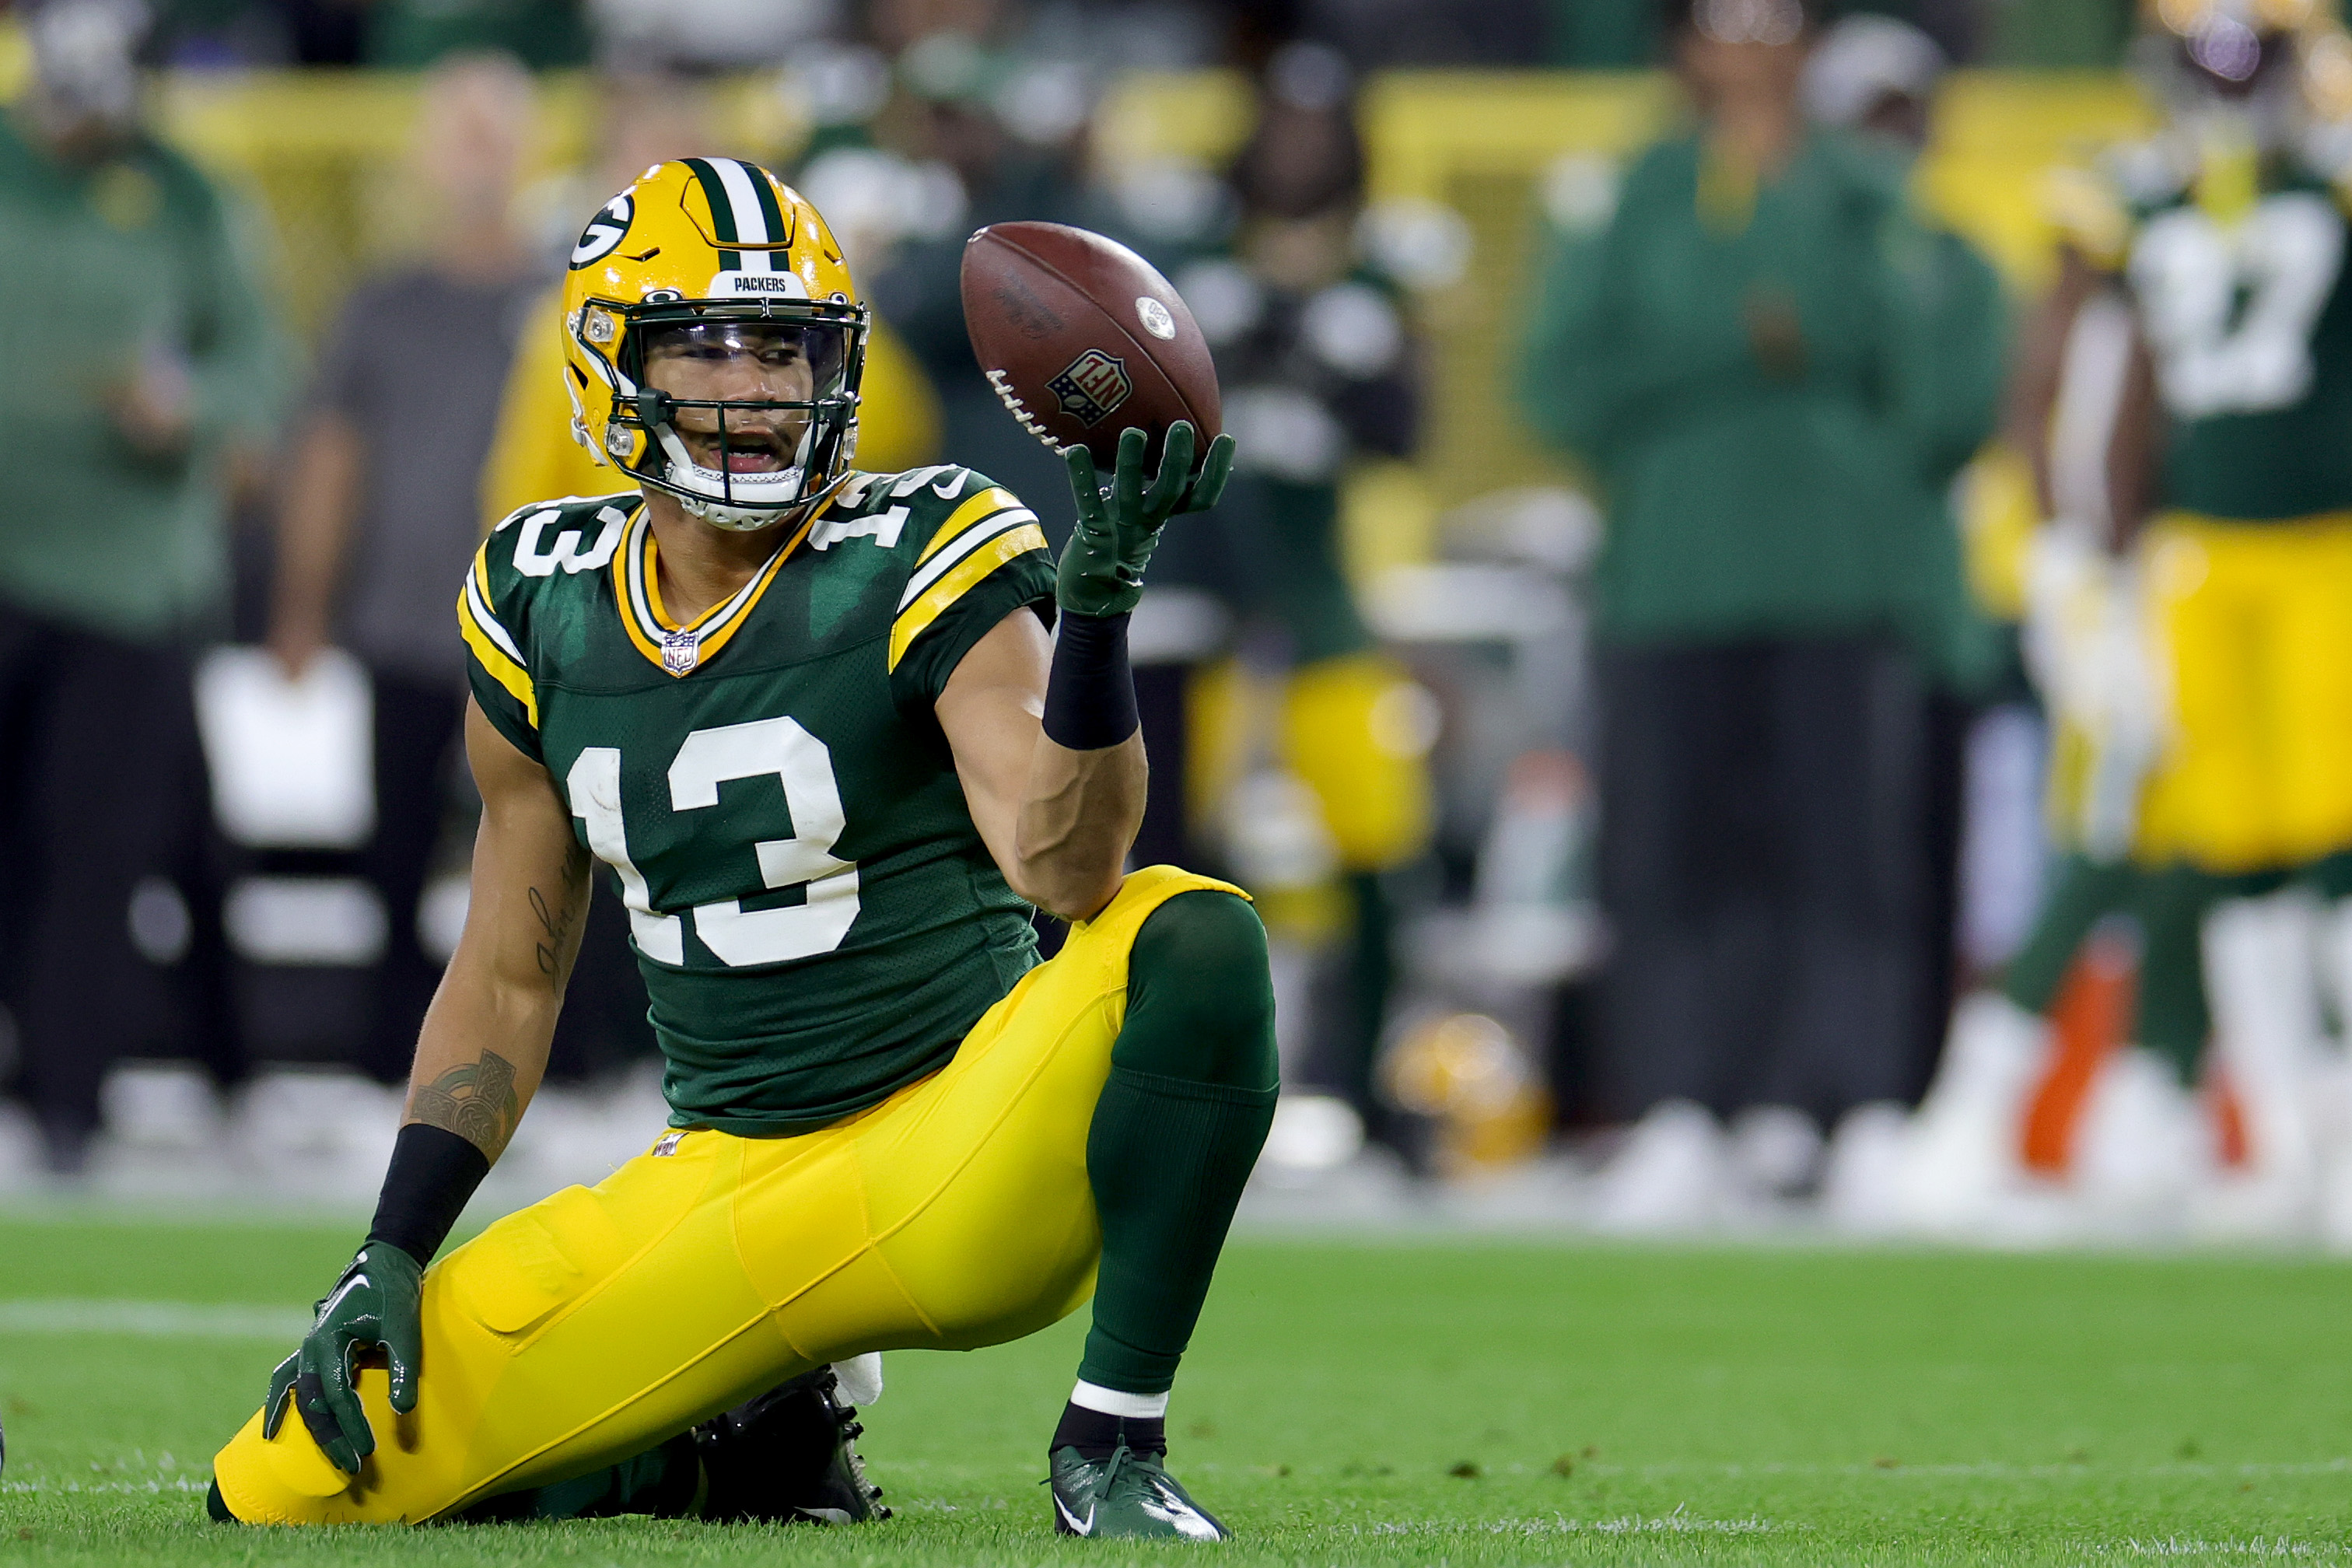 Allen Lazard #13 of the Green Bay Packers reacts after a first down during the first quarter in the game against the Chicago Bears at Lambeau Field on September 18, 2022 in Green Bay, Wisconsin.